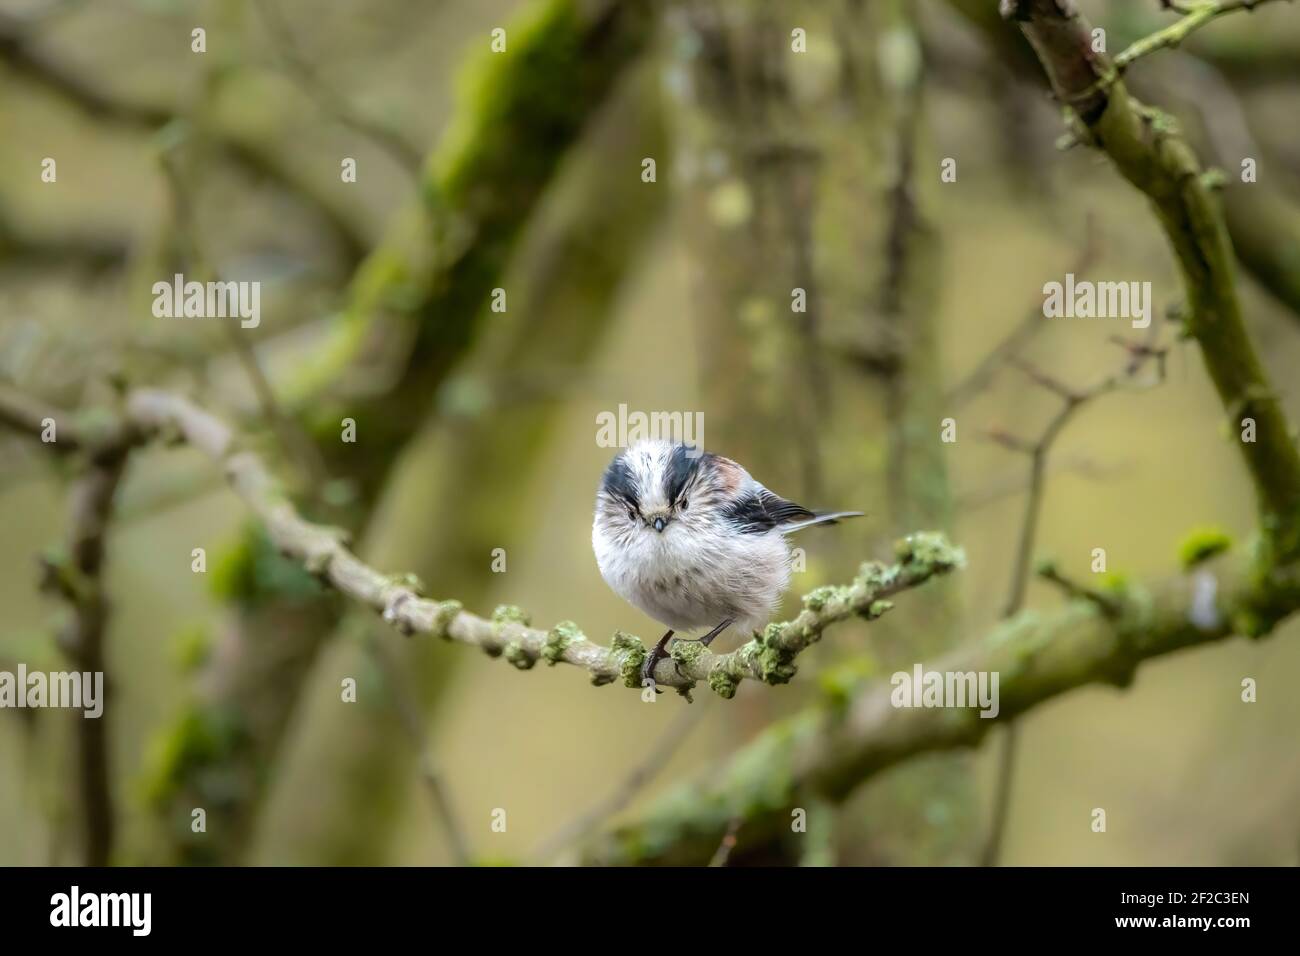 A long-tailed tit sitting on a branch of a tree at the Mönchbruch pond in a natural reserve in Hesse Germany. Stock Photo